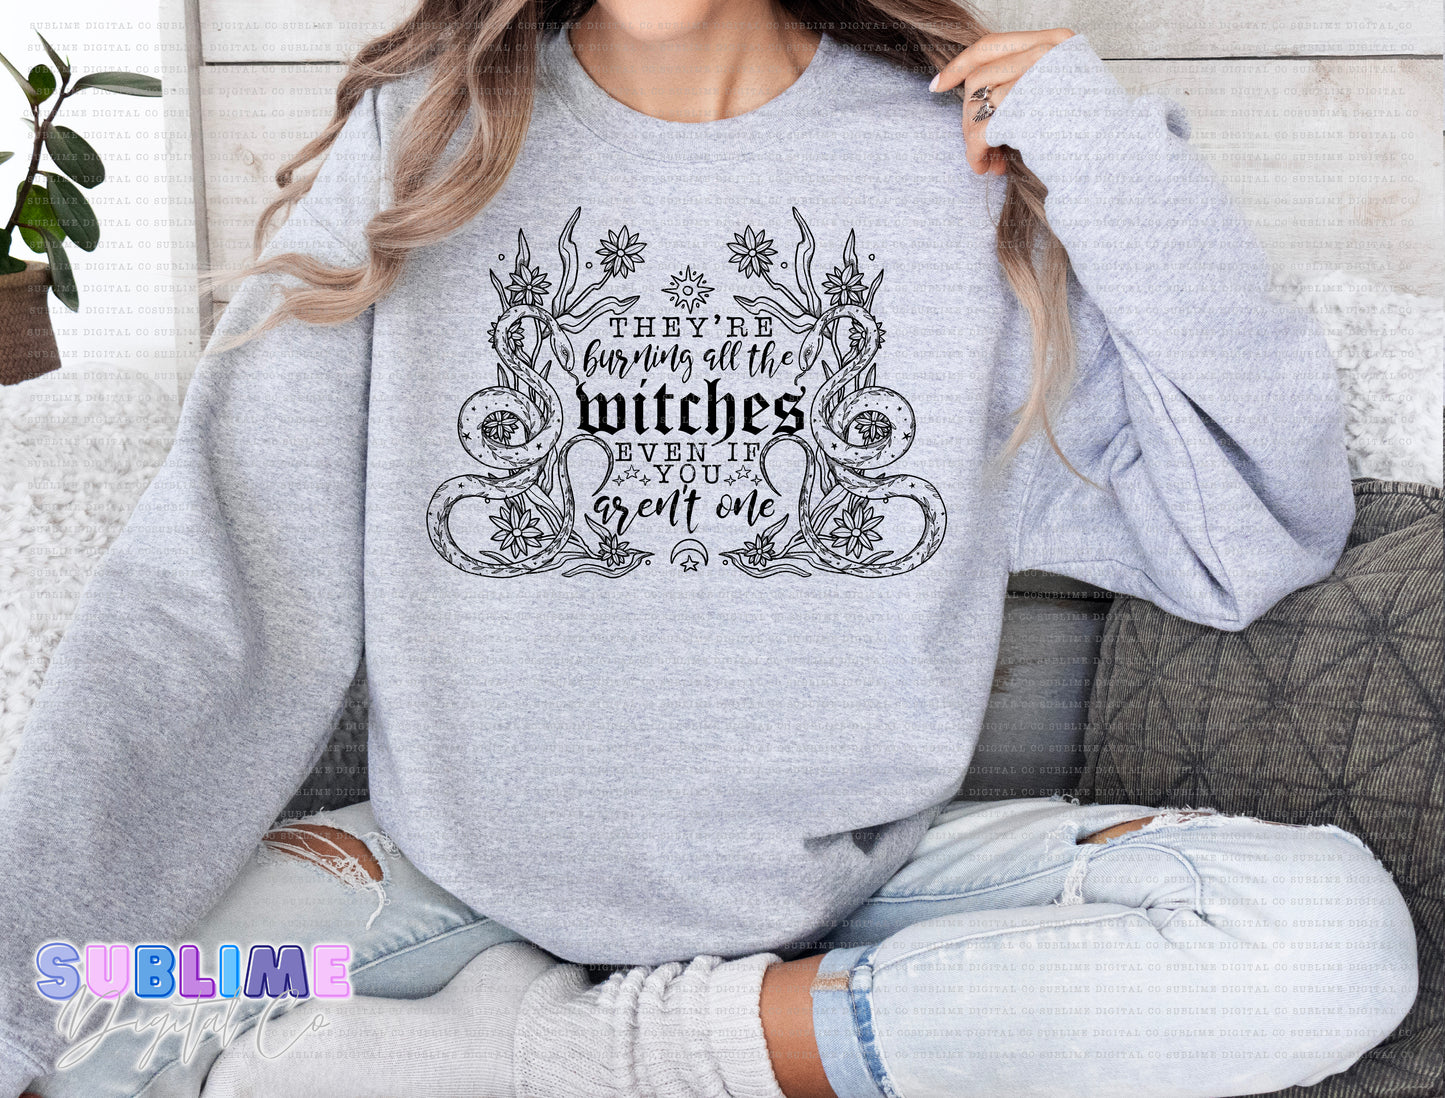 Burning All The Witches • Single Color • Adult Apparel • Made to Order • TAT: Up To 21 Days